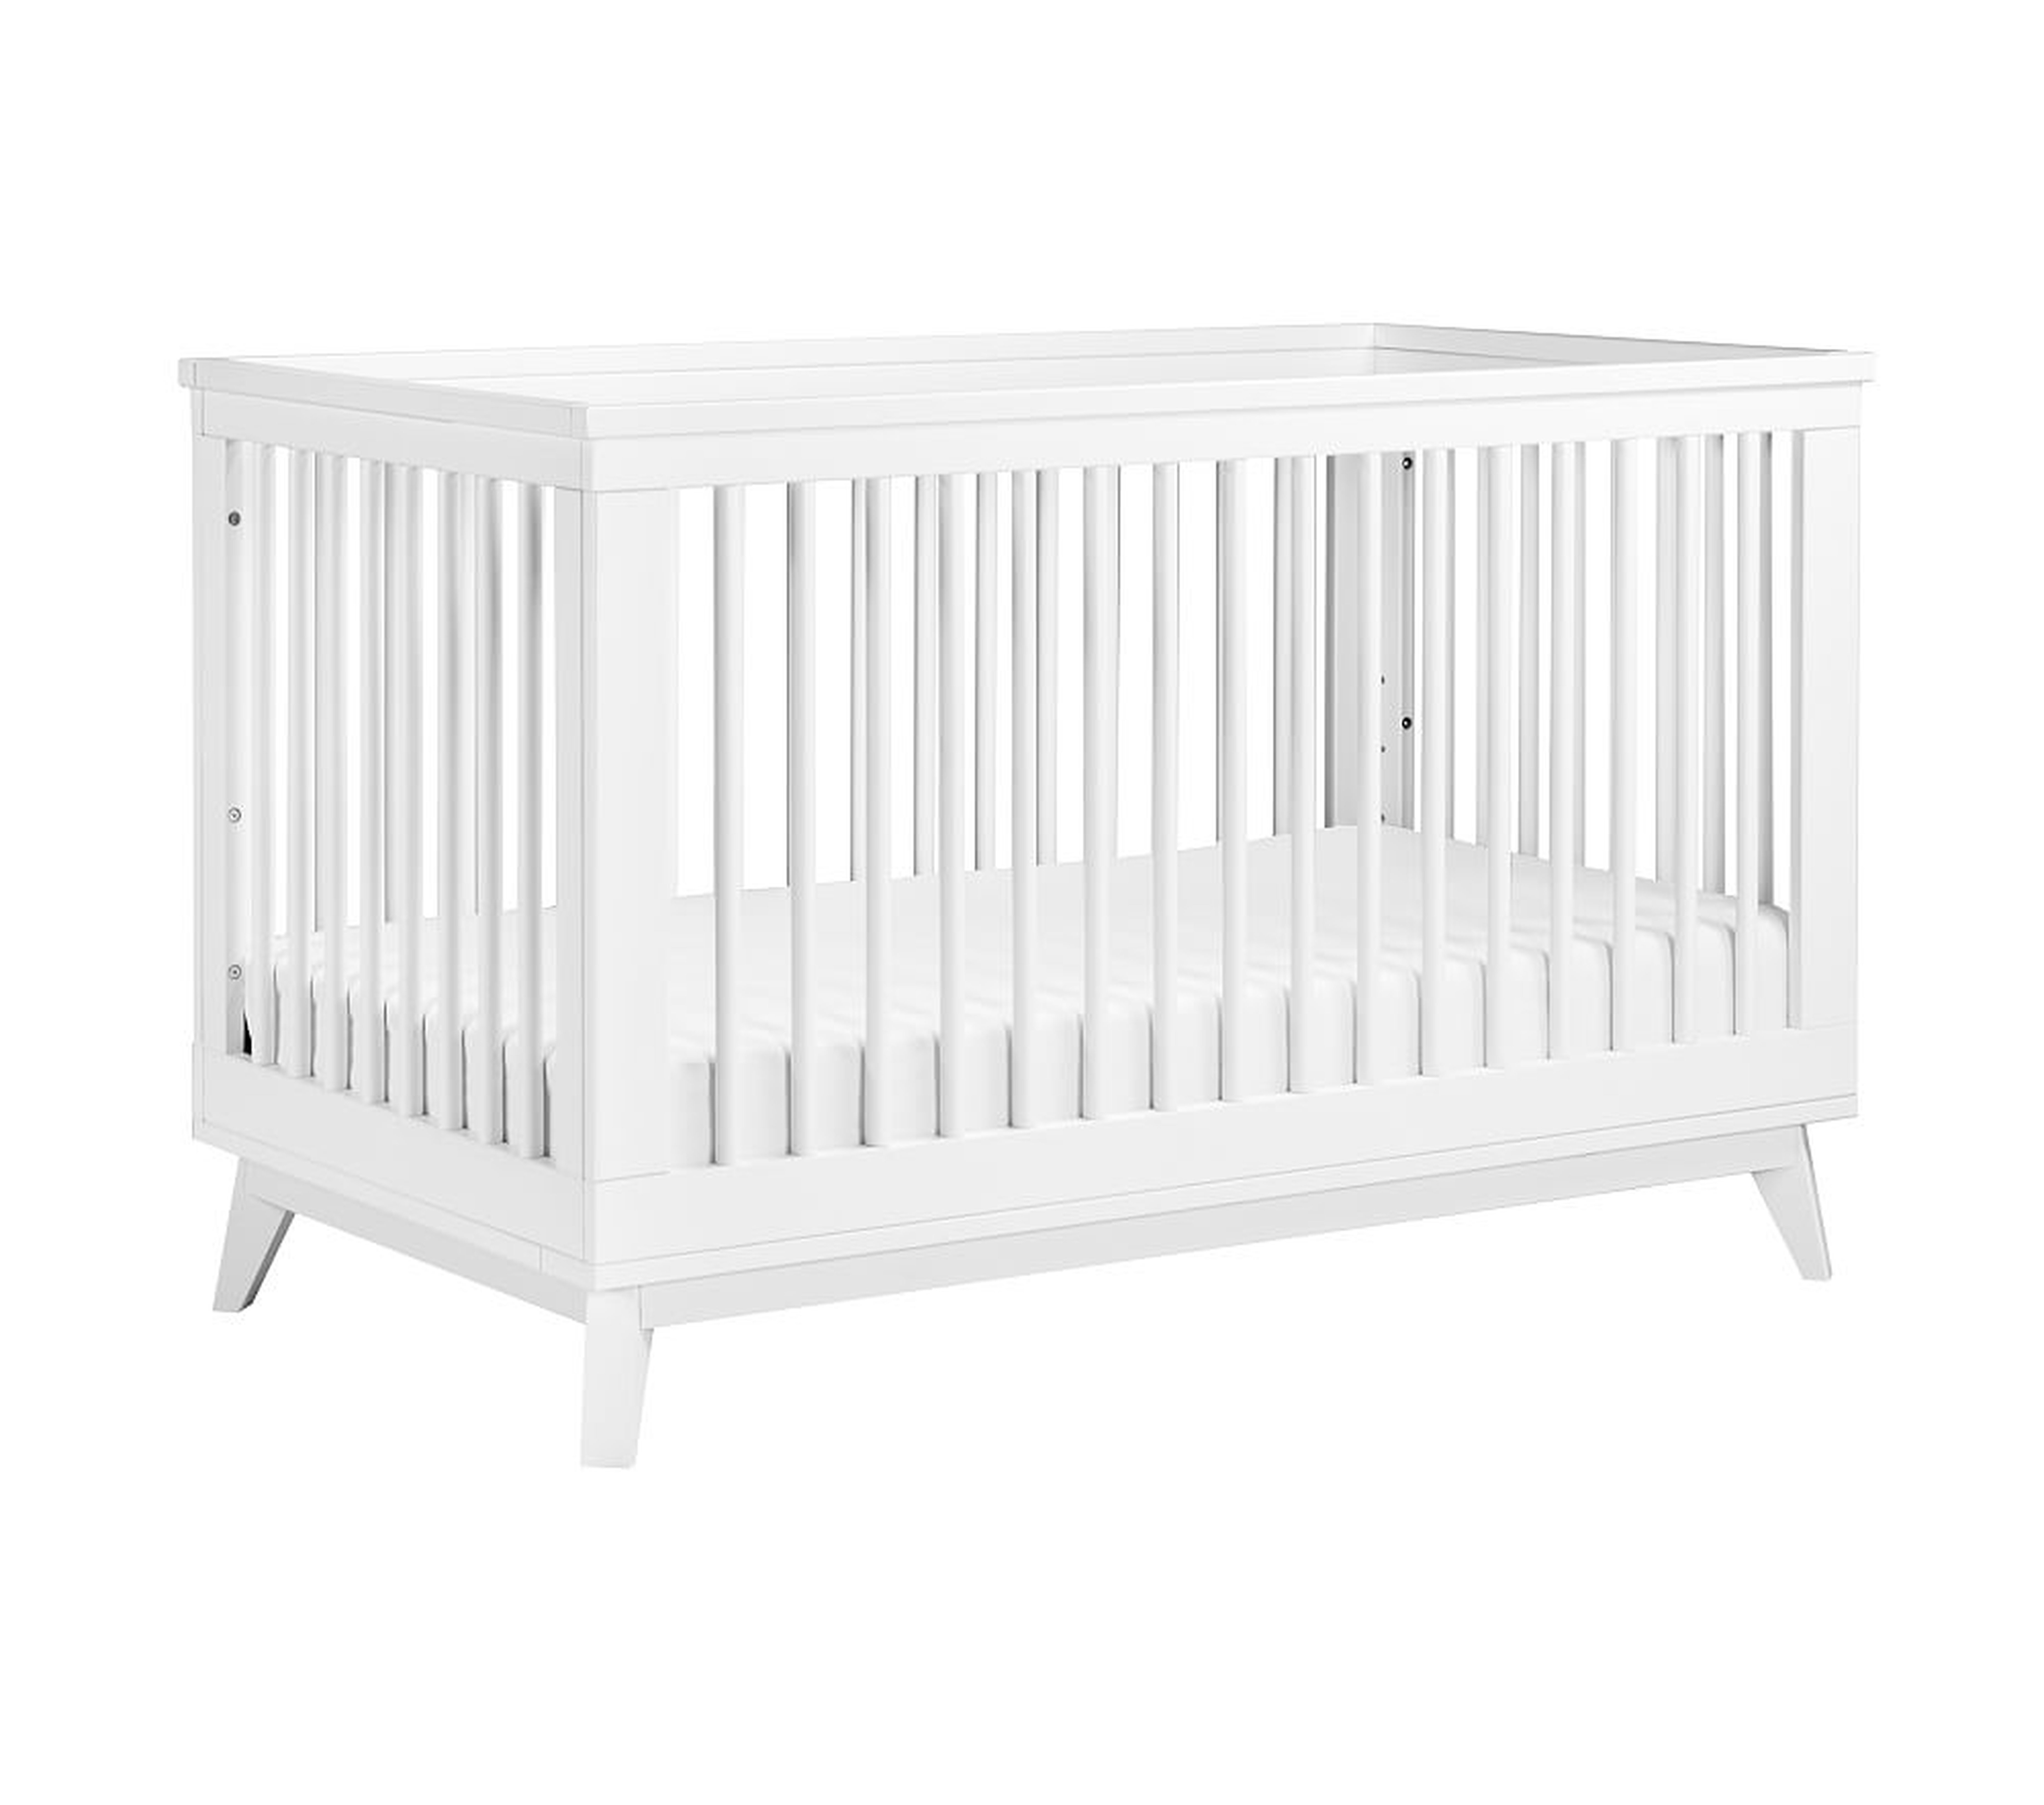 Babyletto Scoot 3 in 1 Convertible Crib & Conversion Kit, White - Pottery Barn Kids